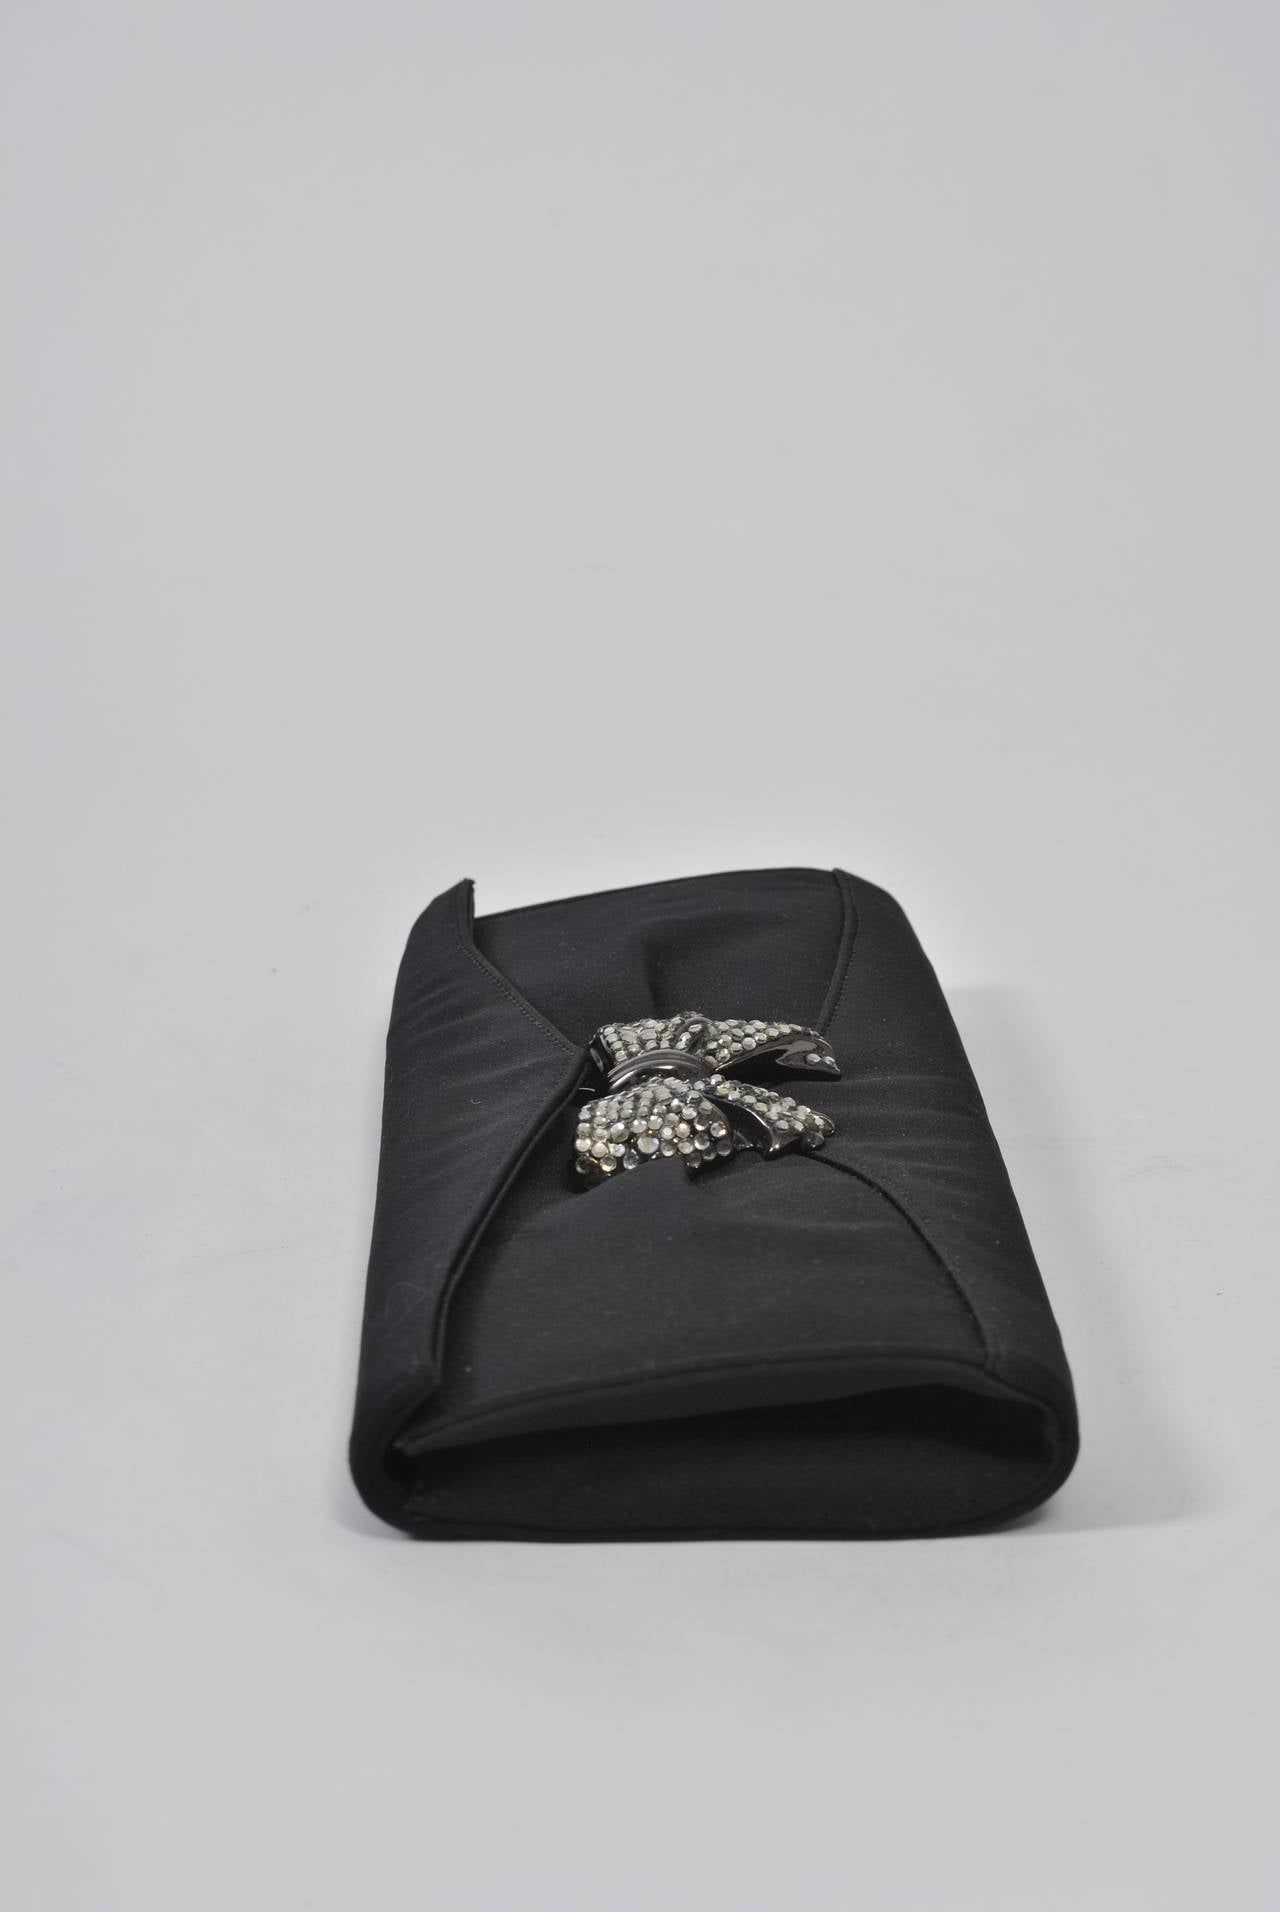 Perfect evening clutch by Rodo, rectangular in shape and featuring a marcasite rhinestone bow clasp. Interior has zippered compartment and metal chain to convert it to a shoulder bag.